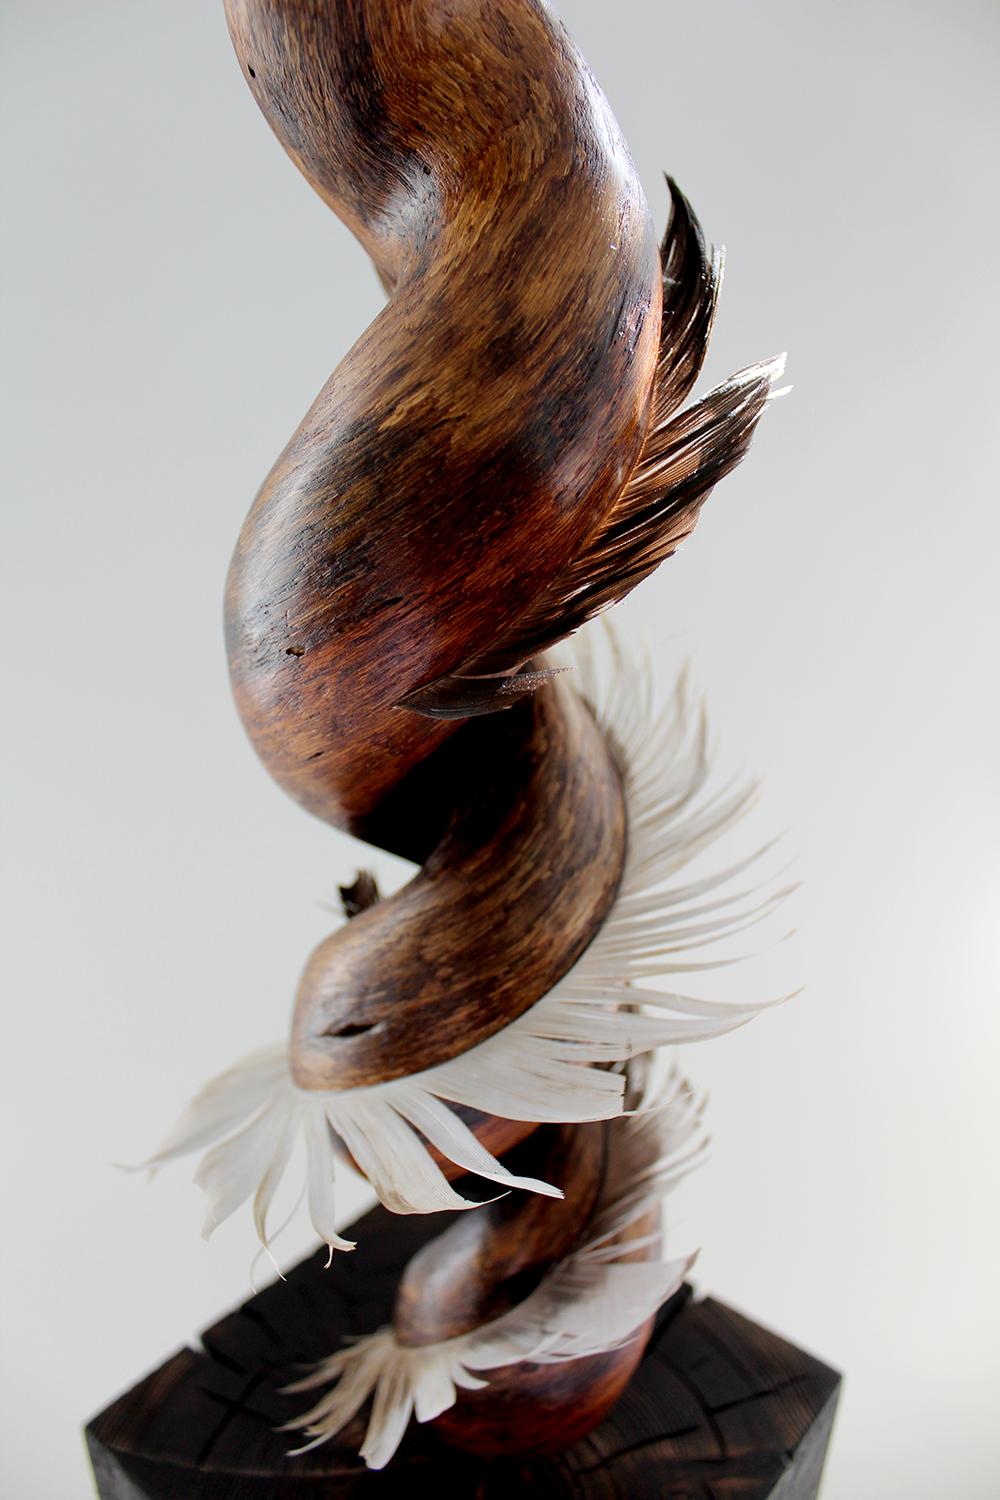 Miller Opie’s “Swishing Larkspur” is a gestural 27 x 6 x 6 inch White Oak wood sculpture with found feather details embedded into the wooden grain. It is the fifth piece in her 8 piece 